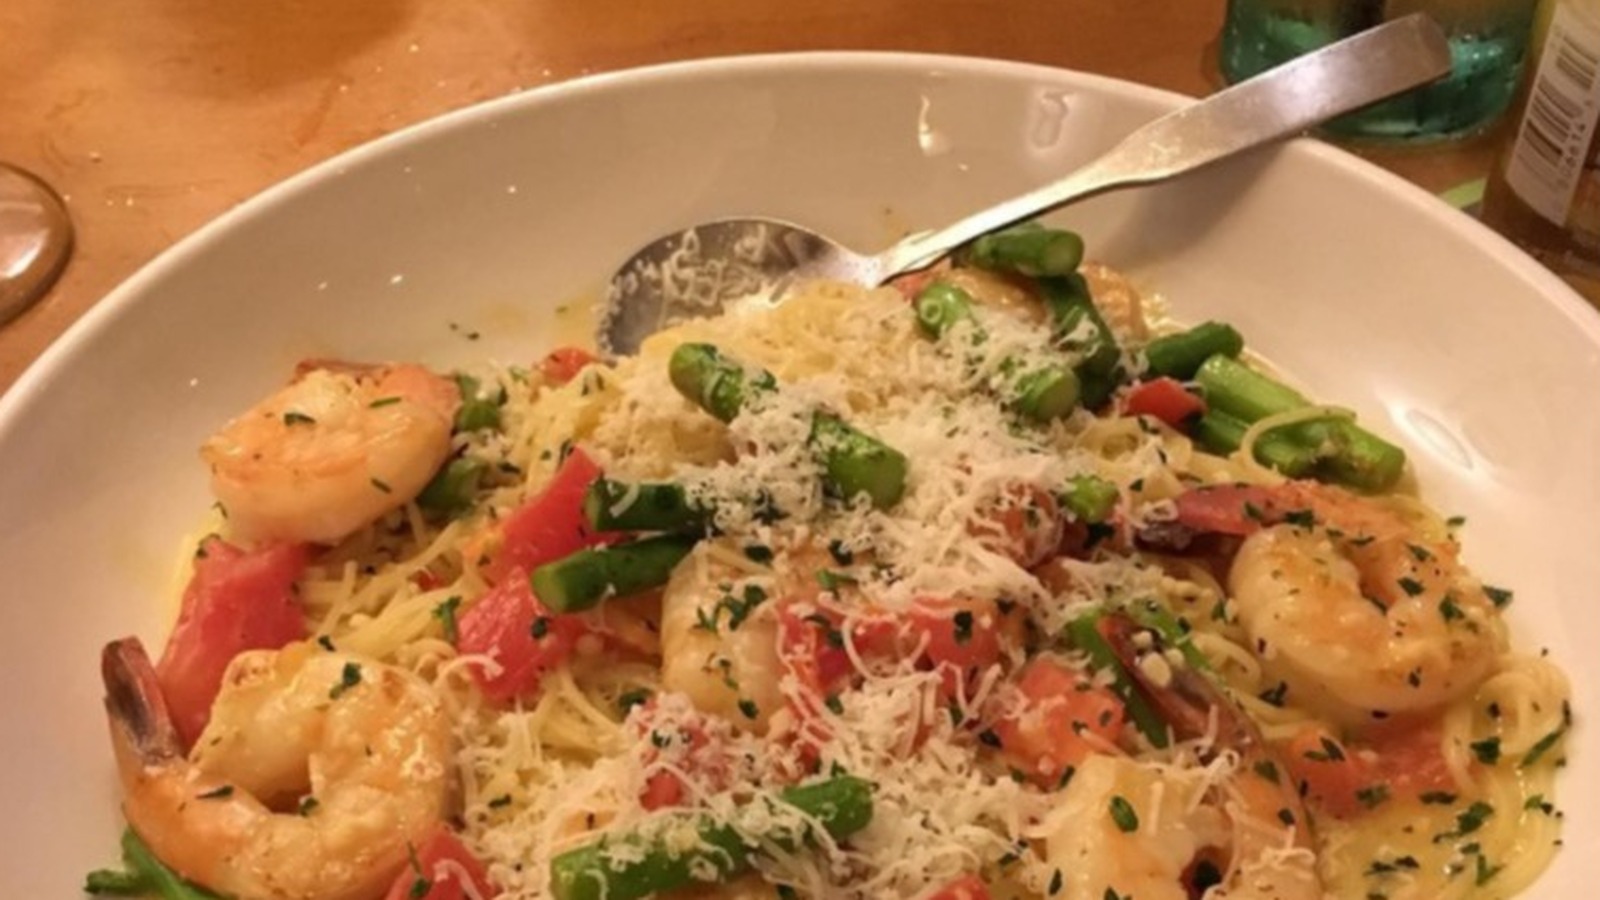 Things You Need to Know Before Eating At Olive Garden